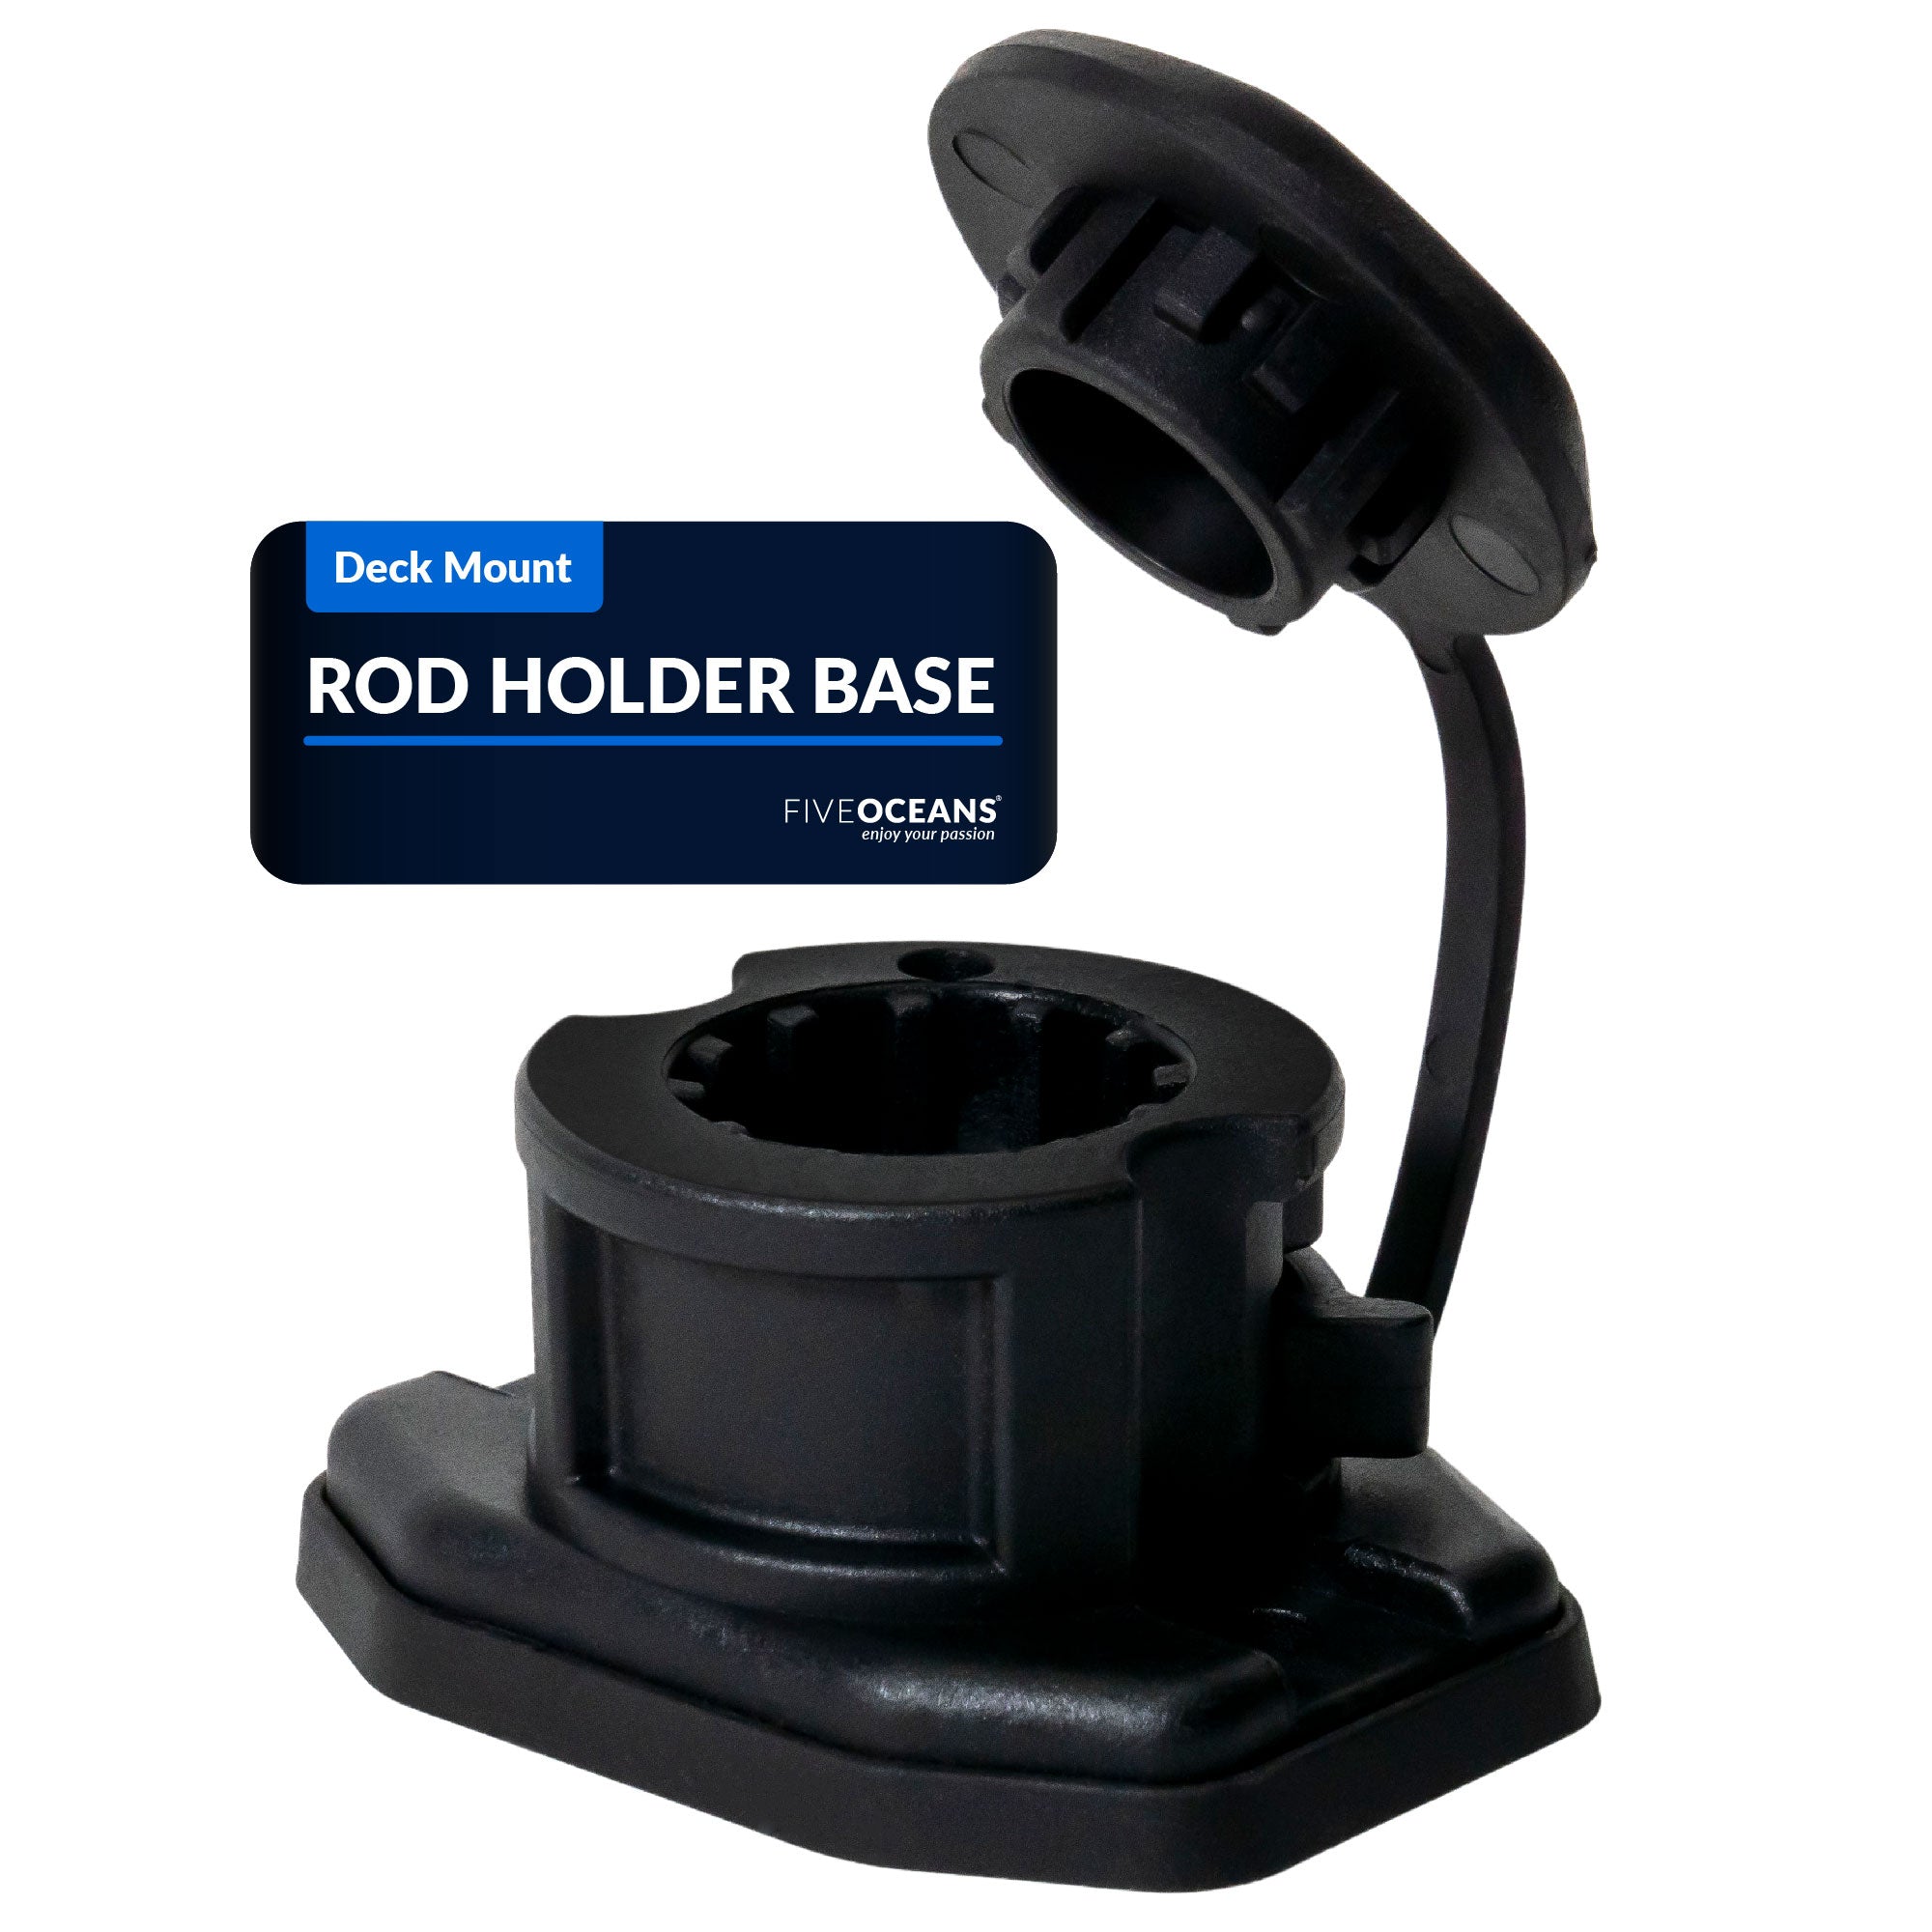 Deck Mount Base with Cap - FO4736